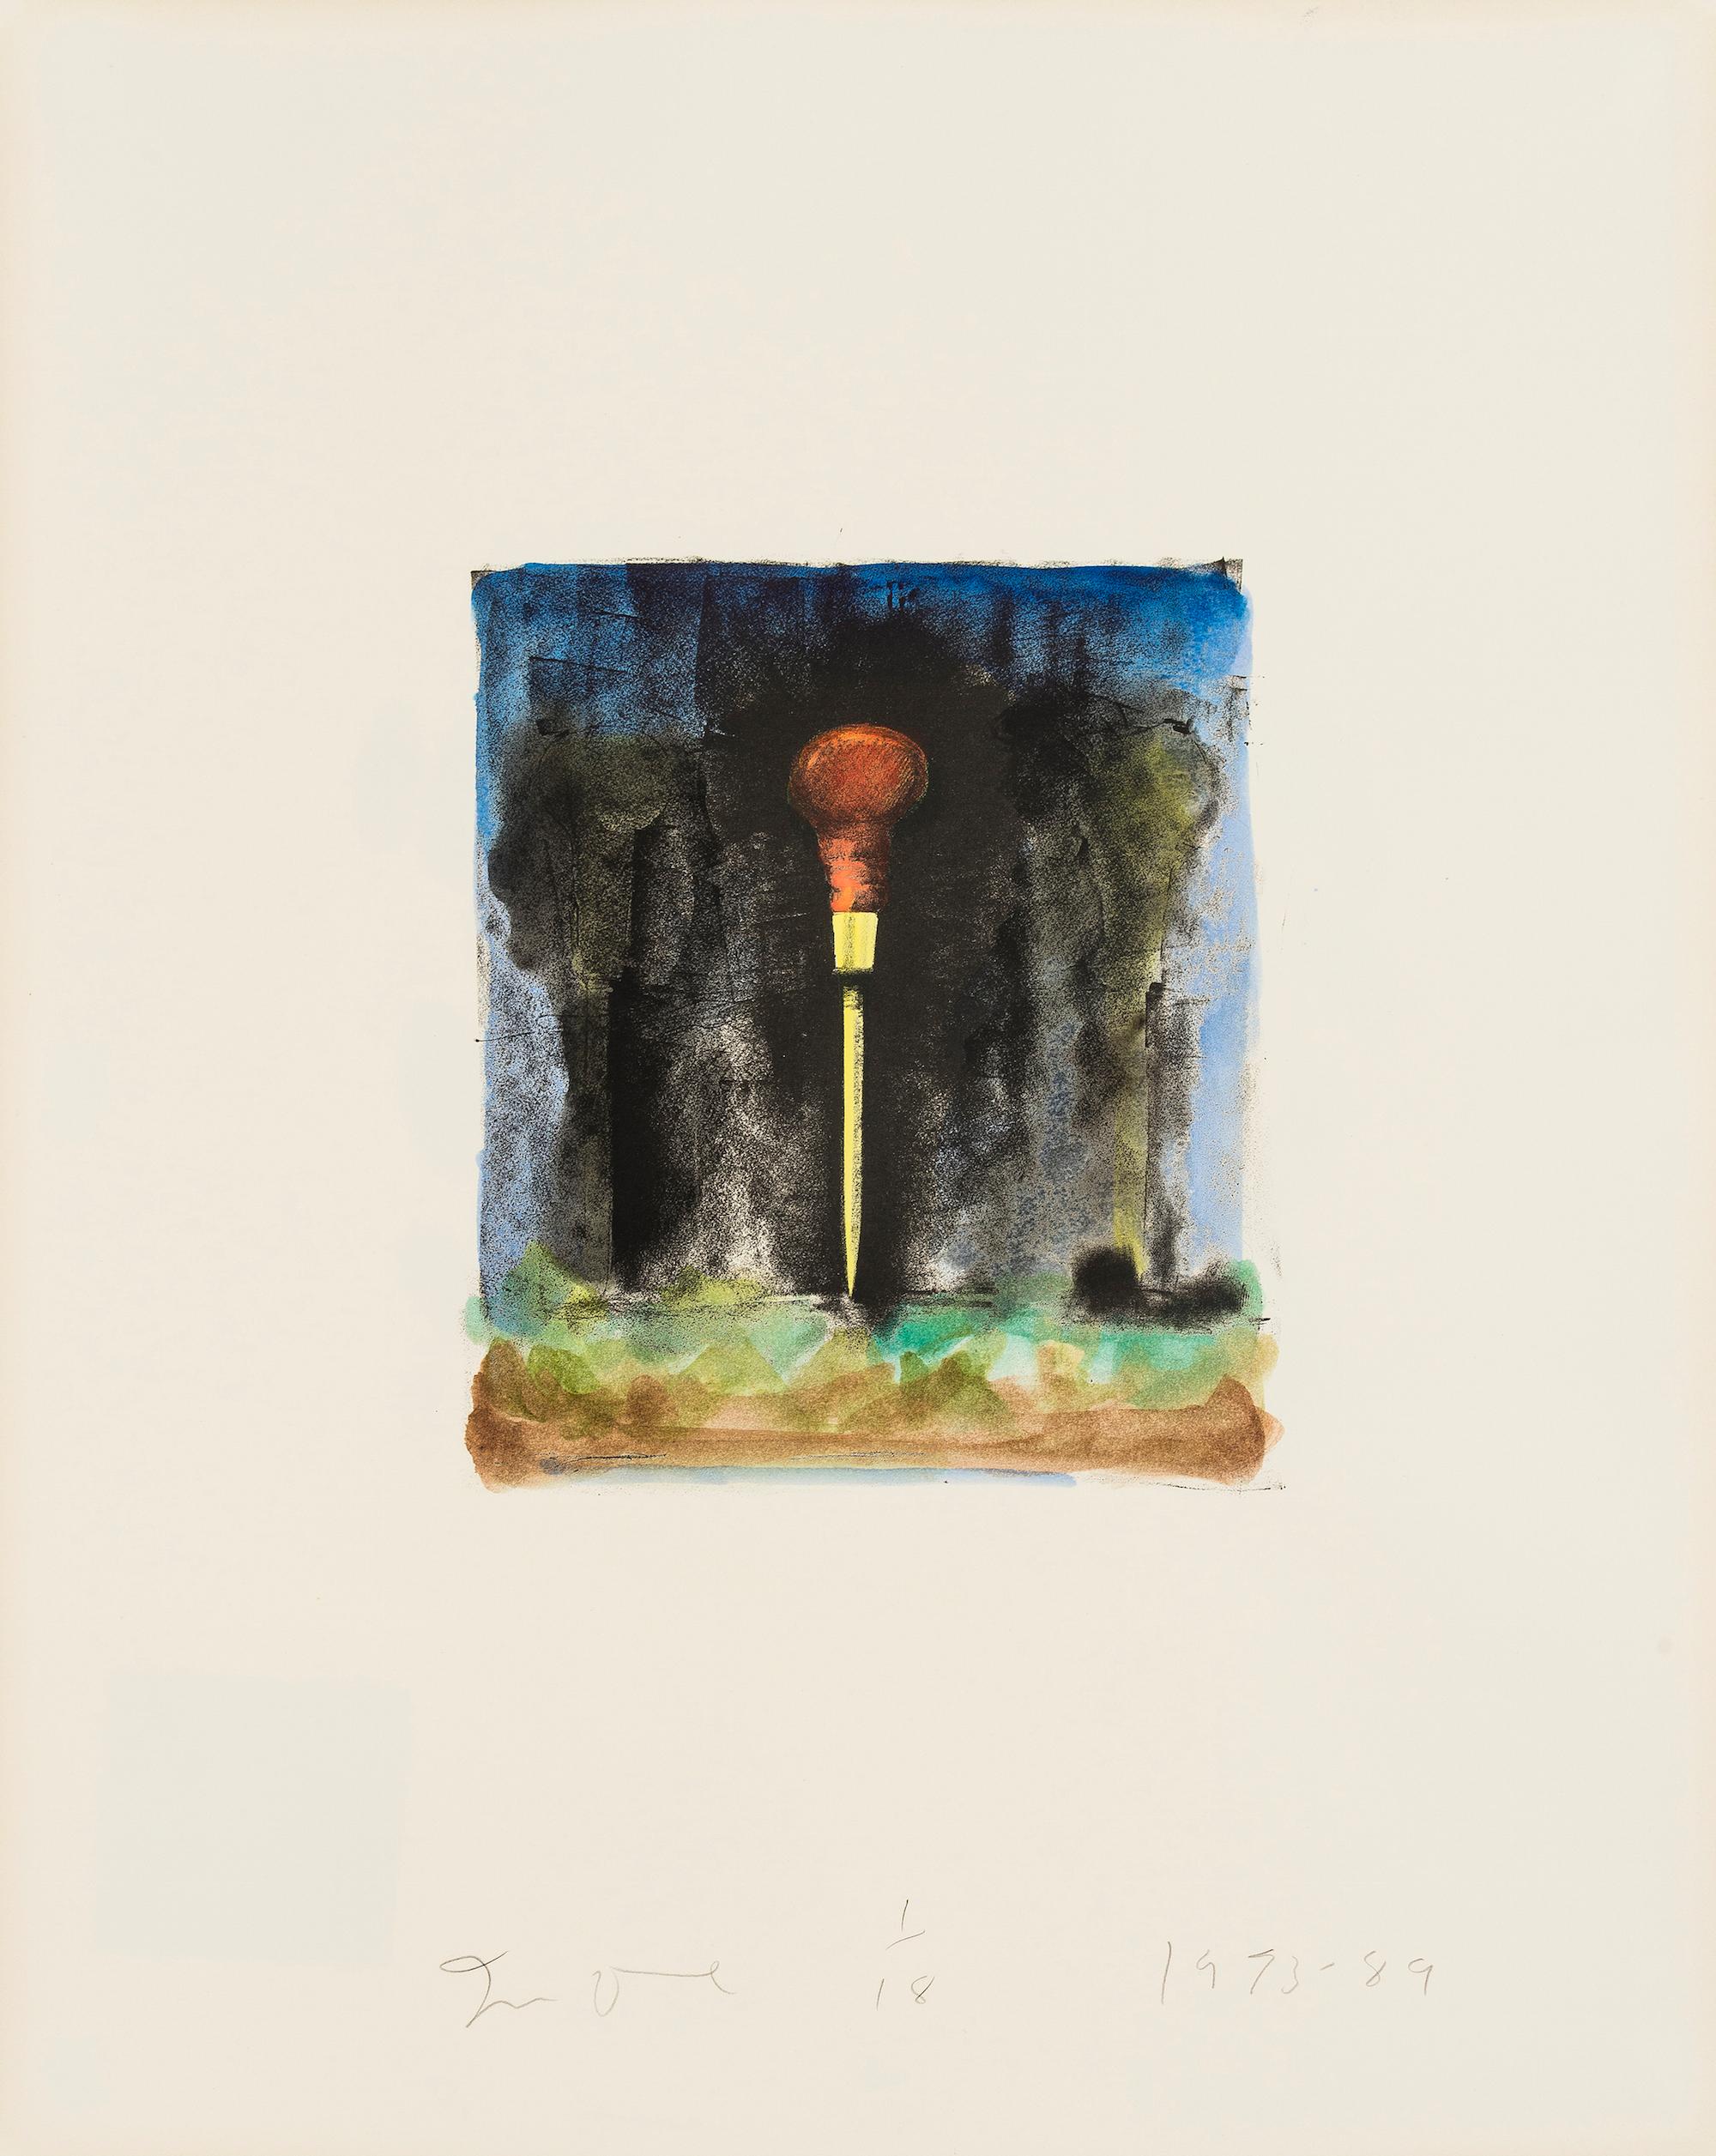  Untitled [Awl] -- Print, Lithograph, Hand-coloured, Tools by Jim Dine